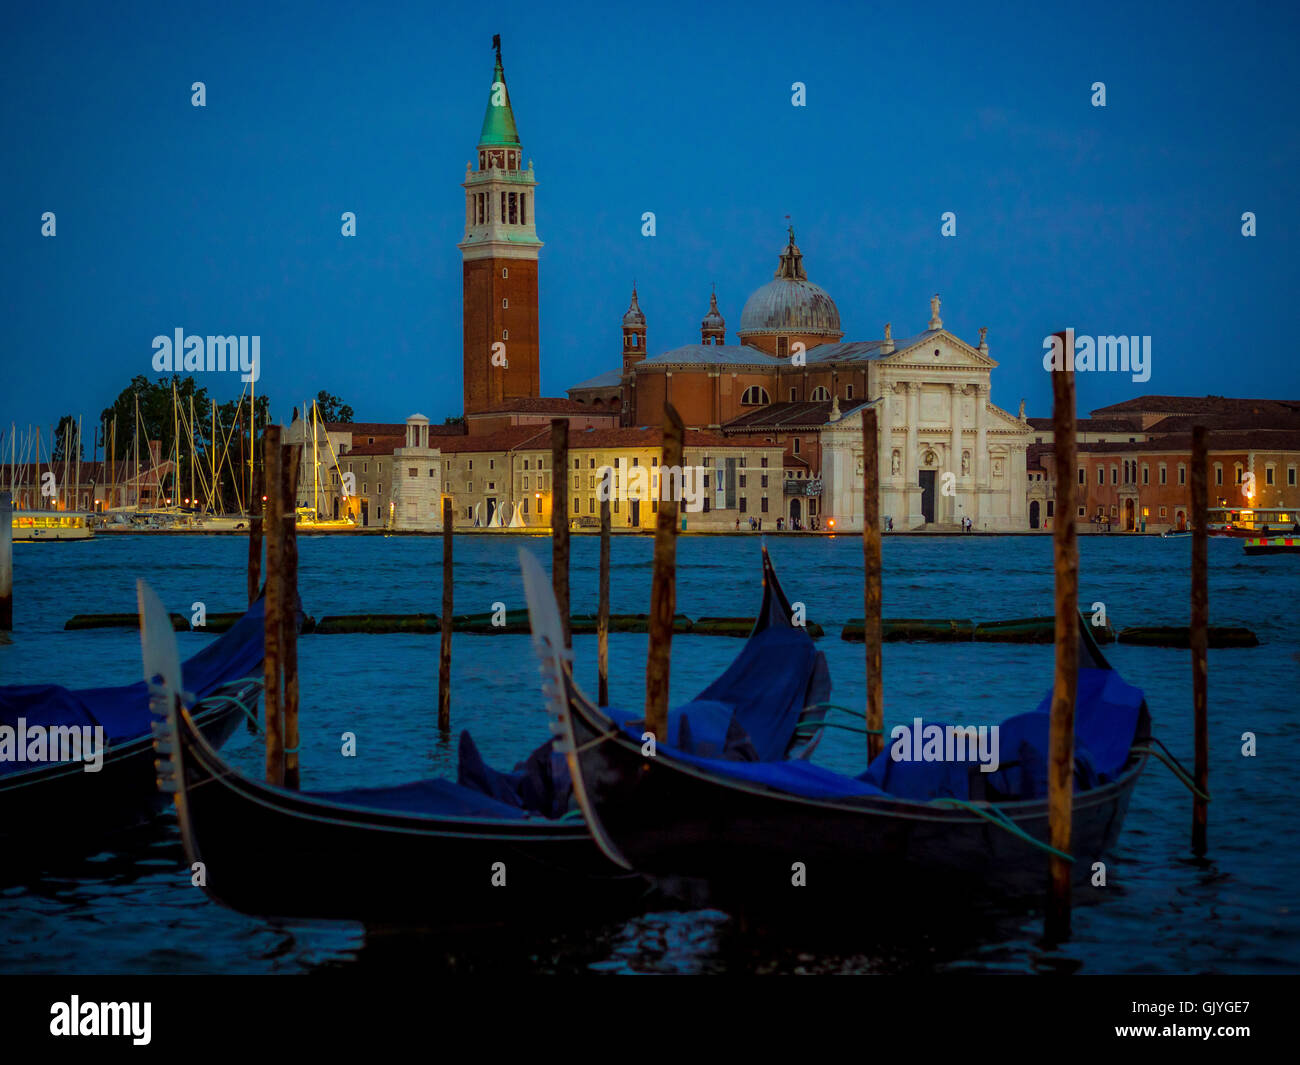 Gondolas moored in St Mark's Basin with  in the background, at night. Venice, Italy. Stock Photo